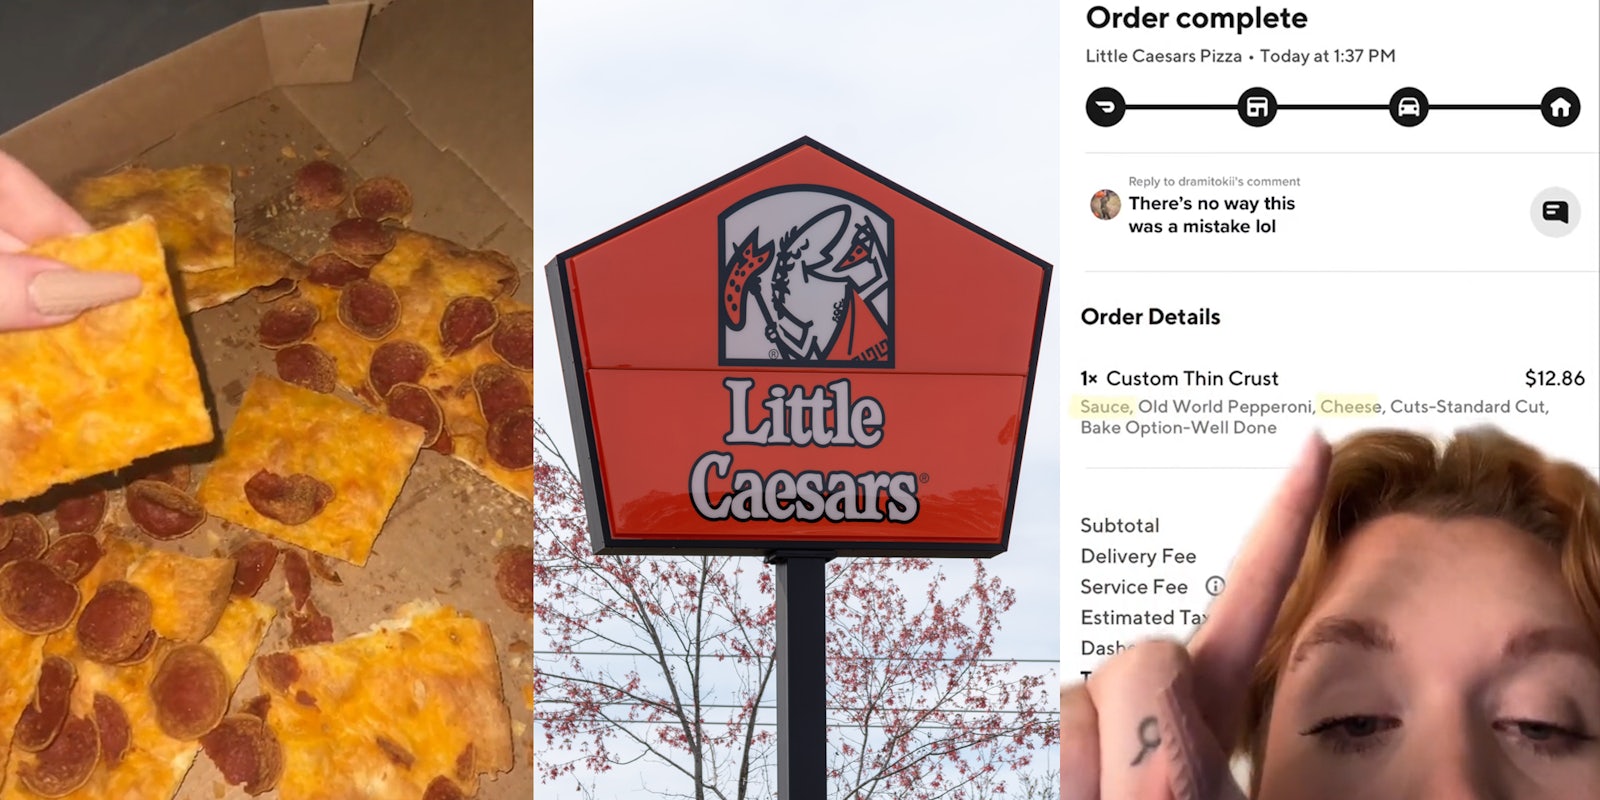 pizza with no cheese or sauce in box (l) Little Caesars sign outside (c) customer pointing finger at order details (r)